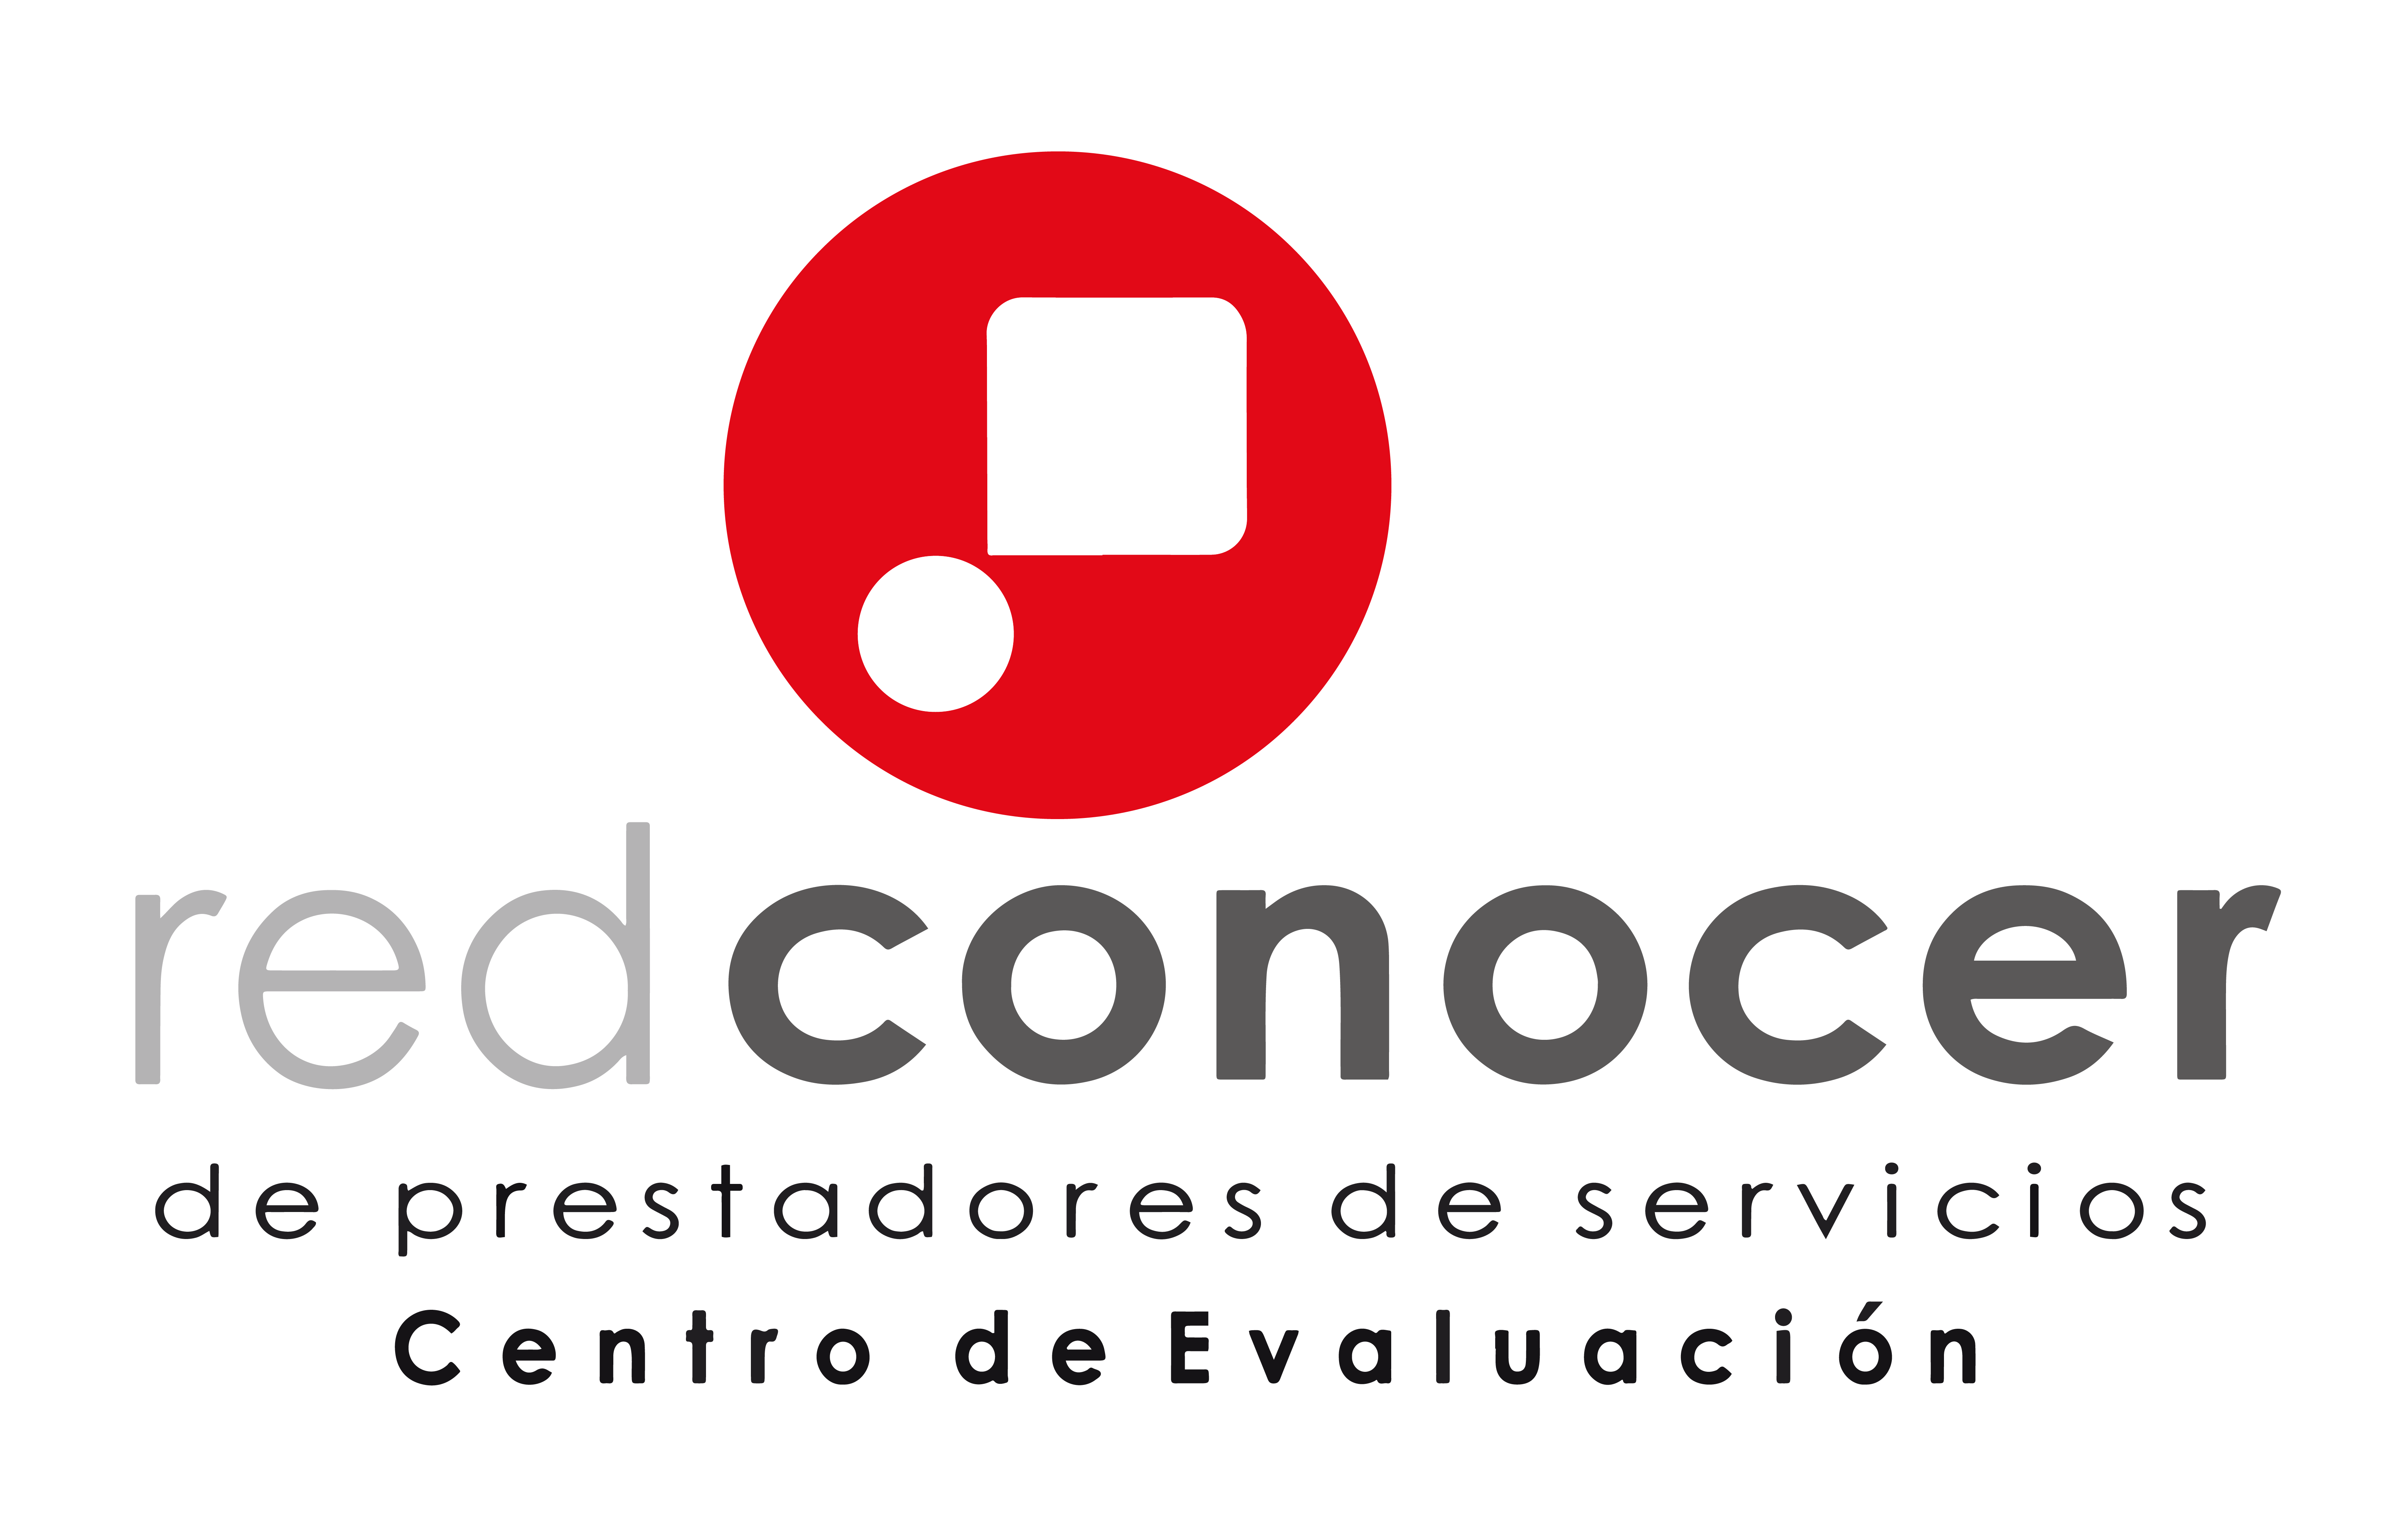 red-conocer